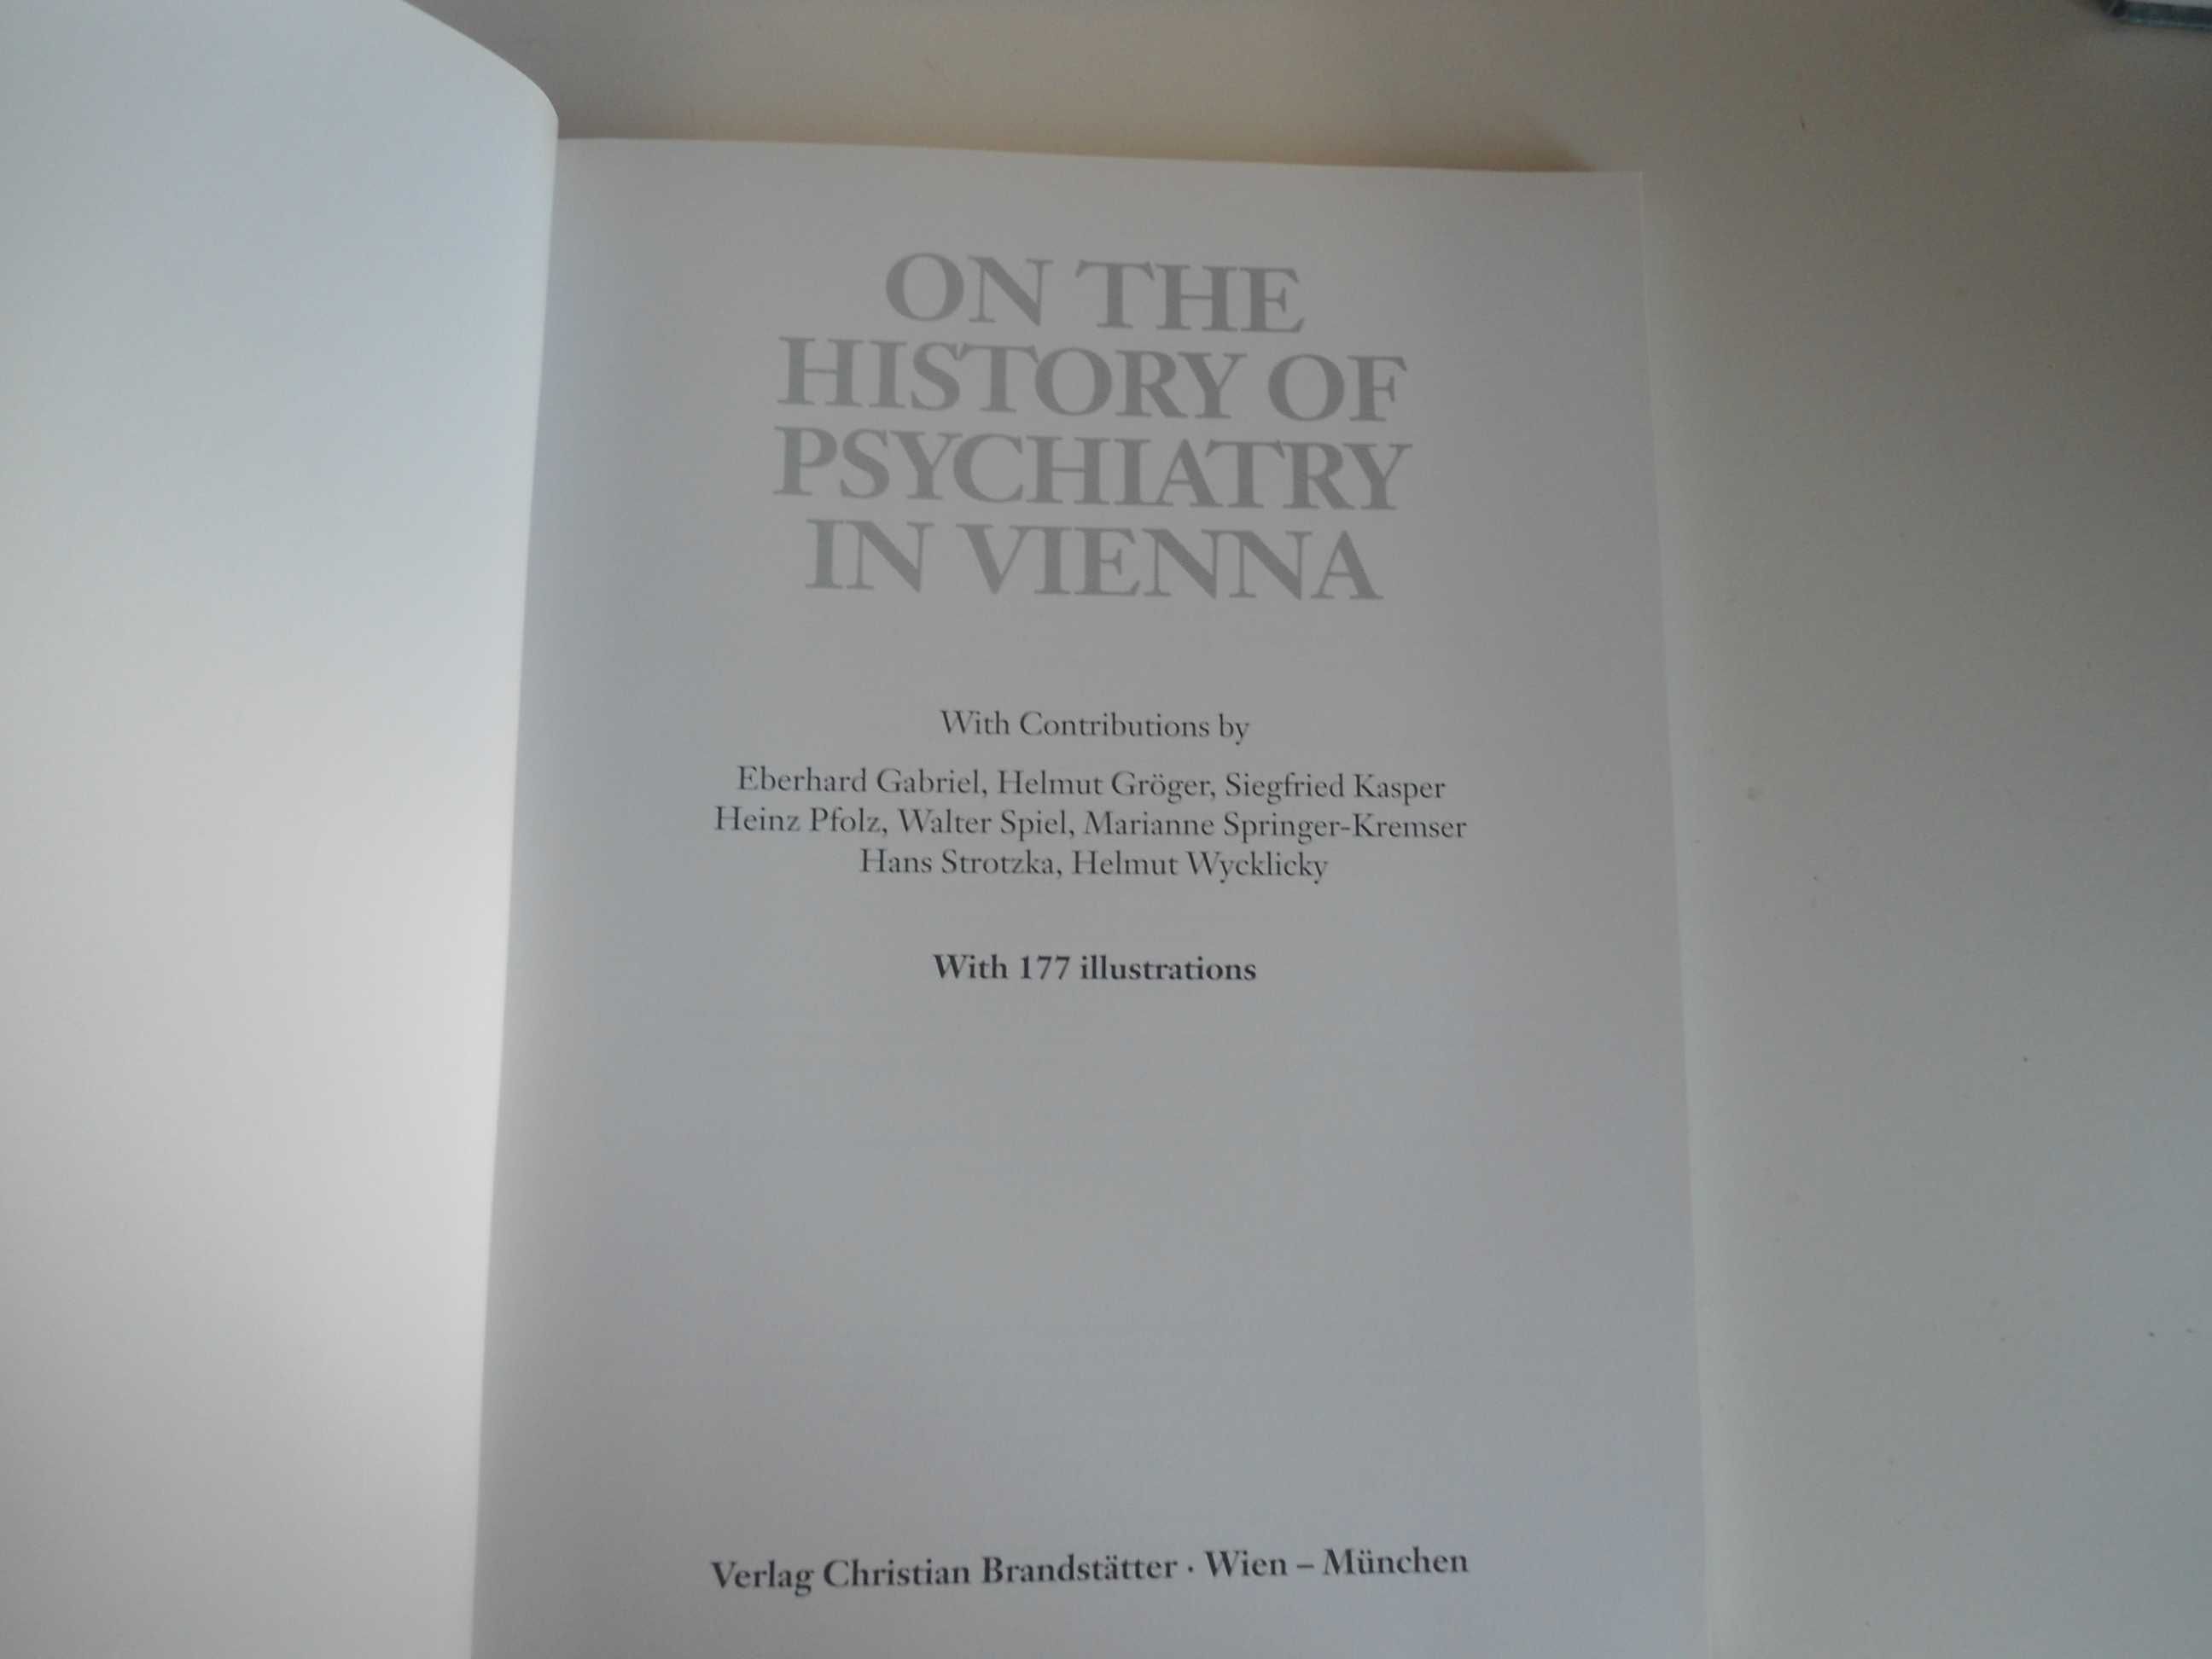 On the History of Psychiatry in Vienna